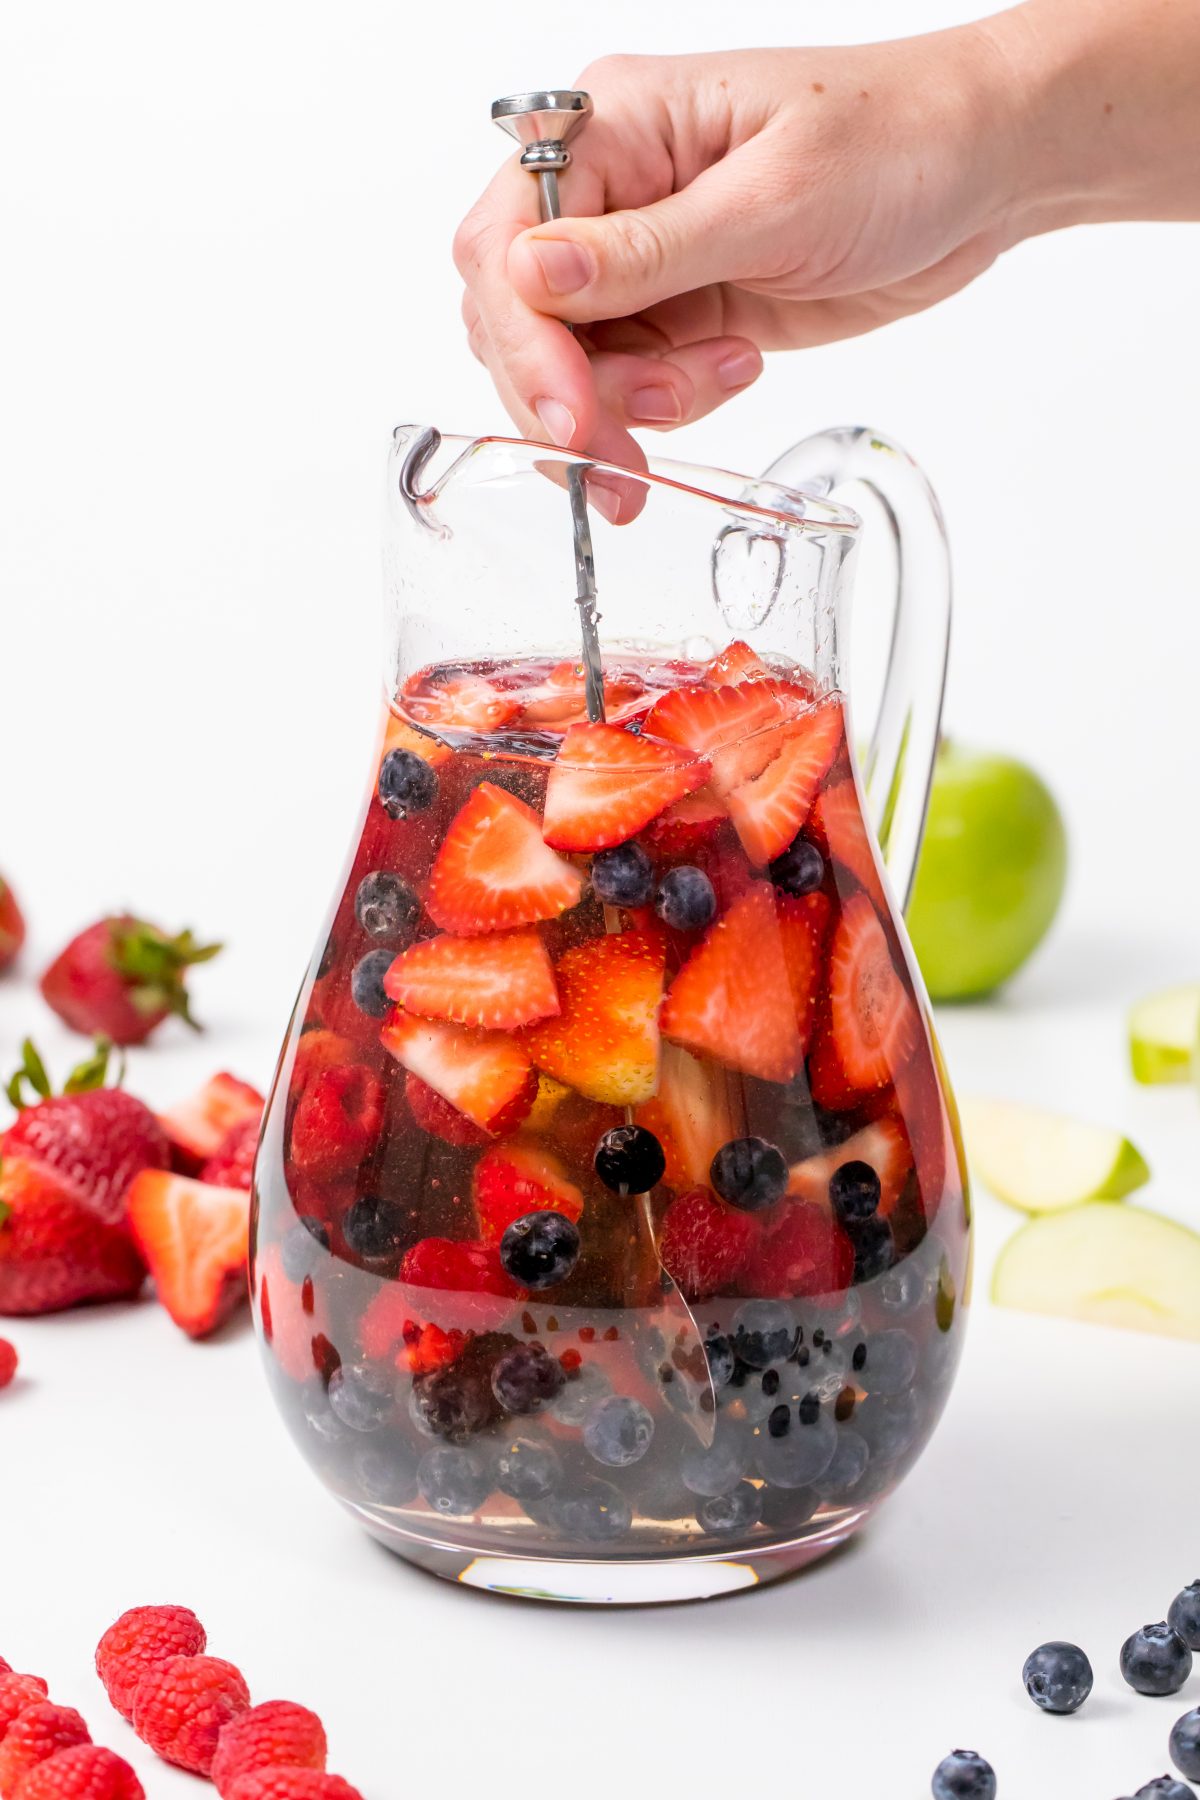 Mix the drink with fruit